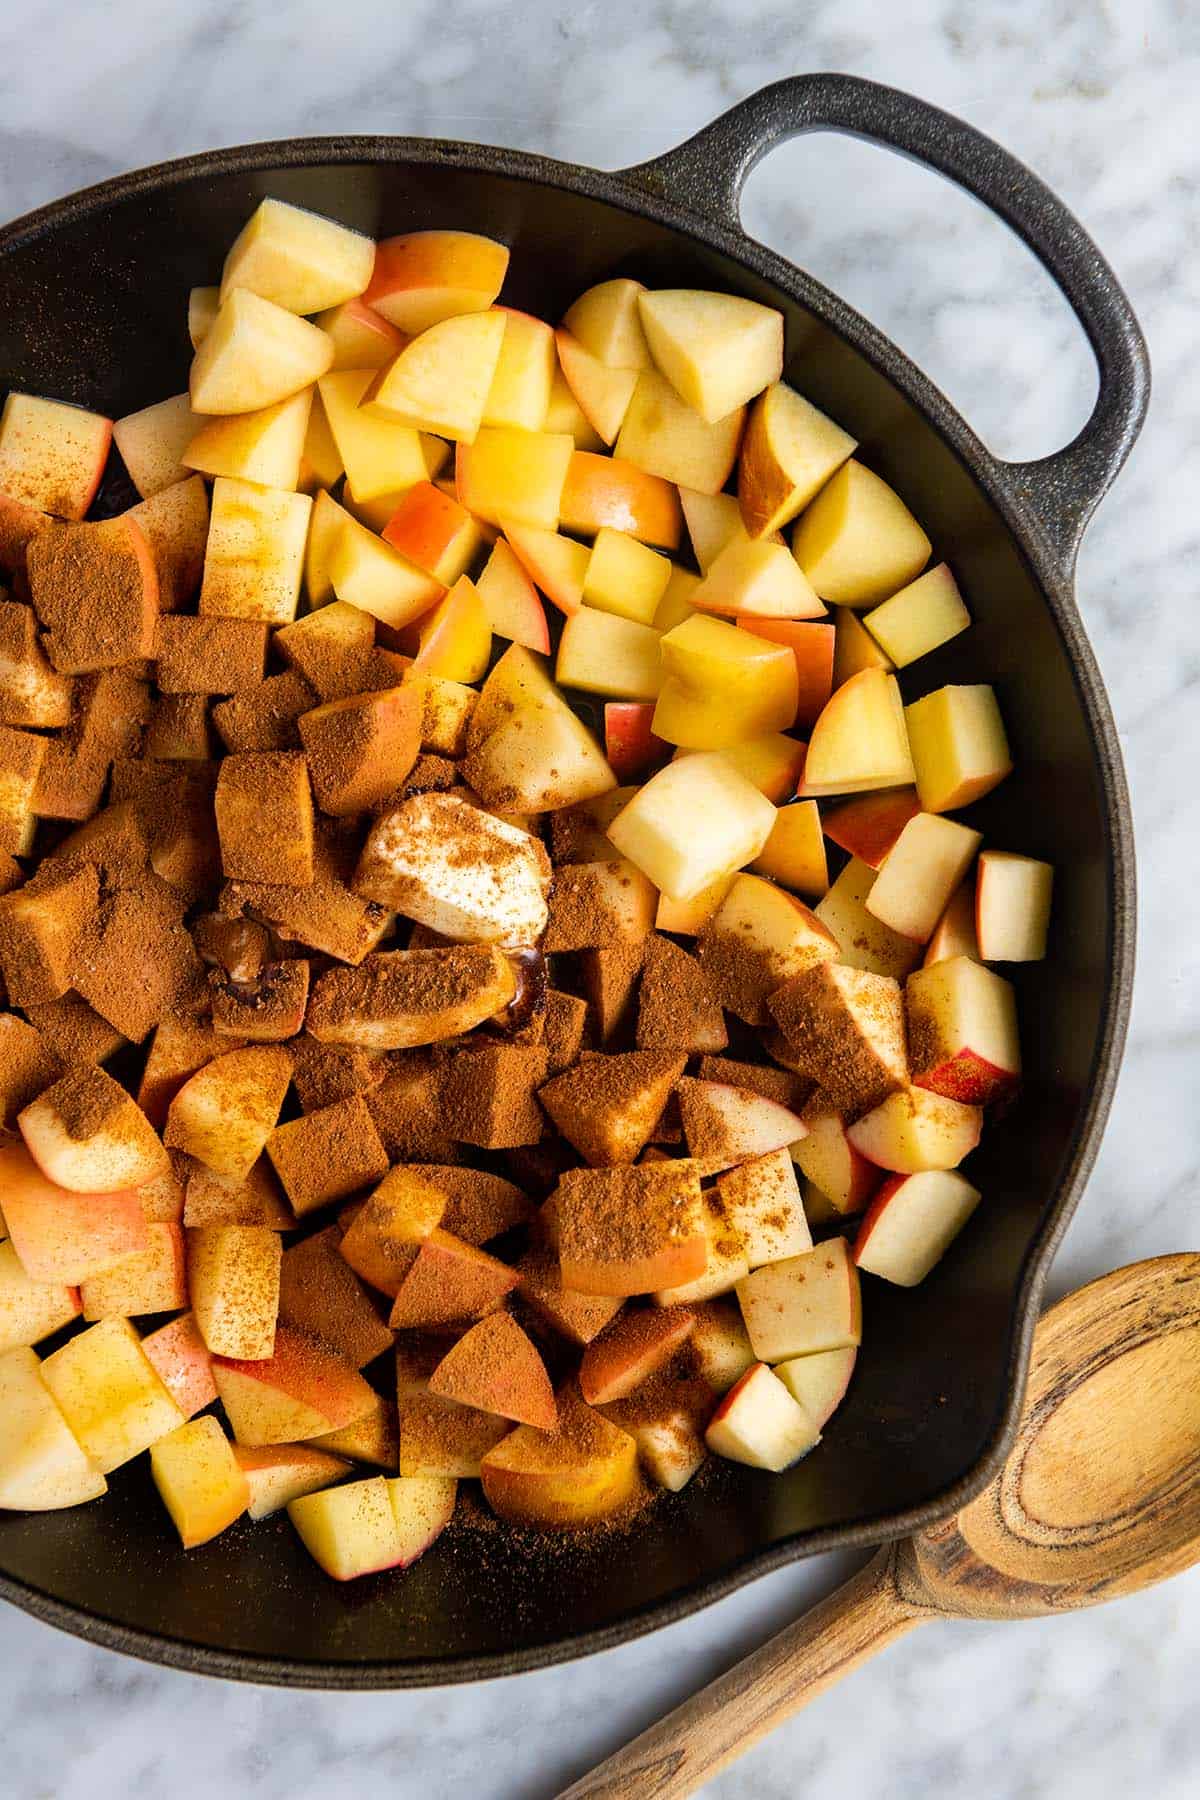 Making Cinnamon Apples in a Skillet with Cinnamon, and other baking spices.